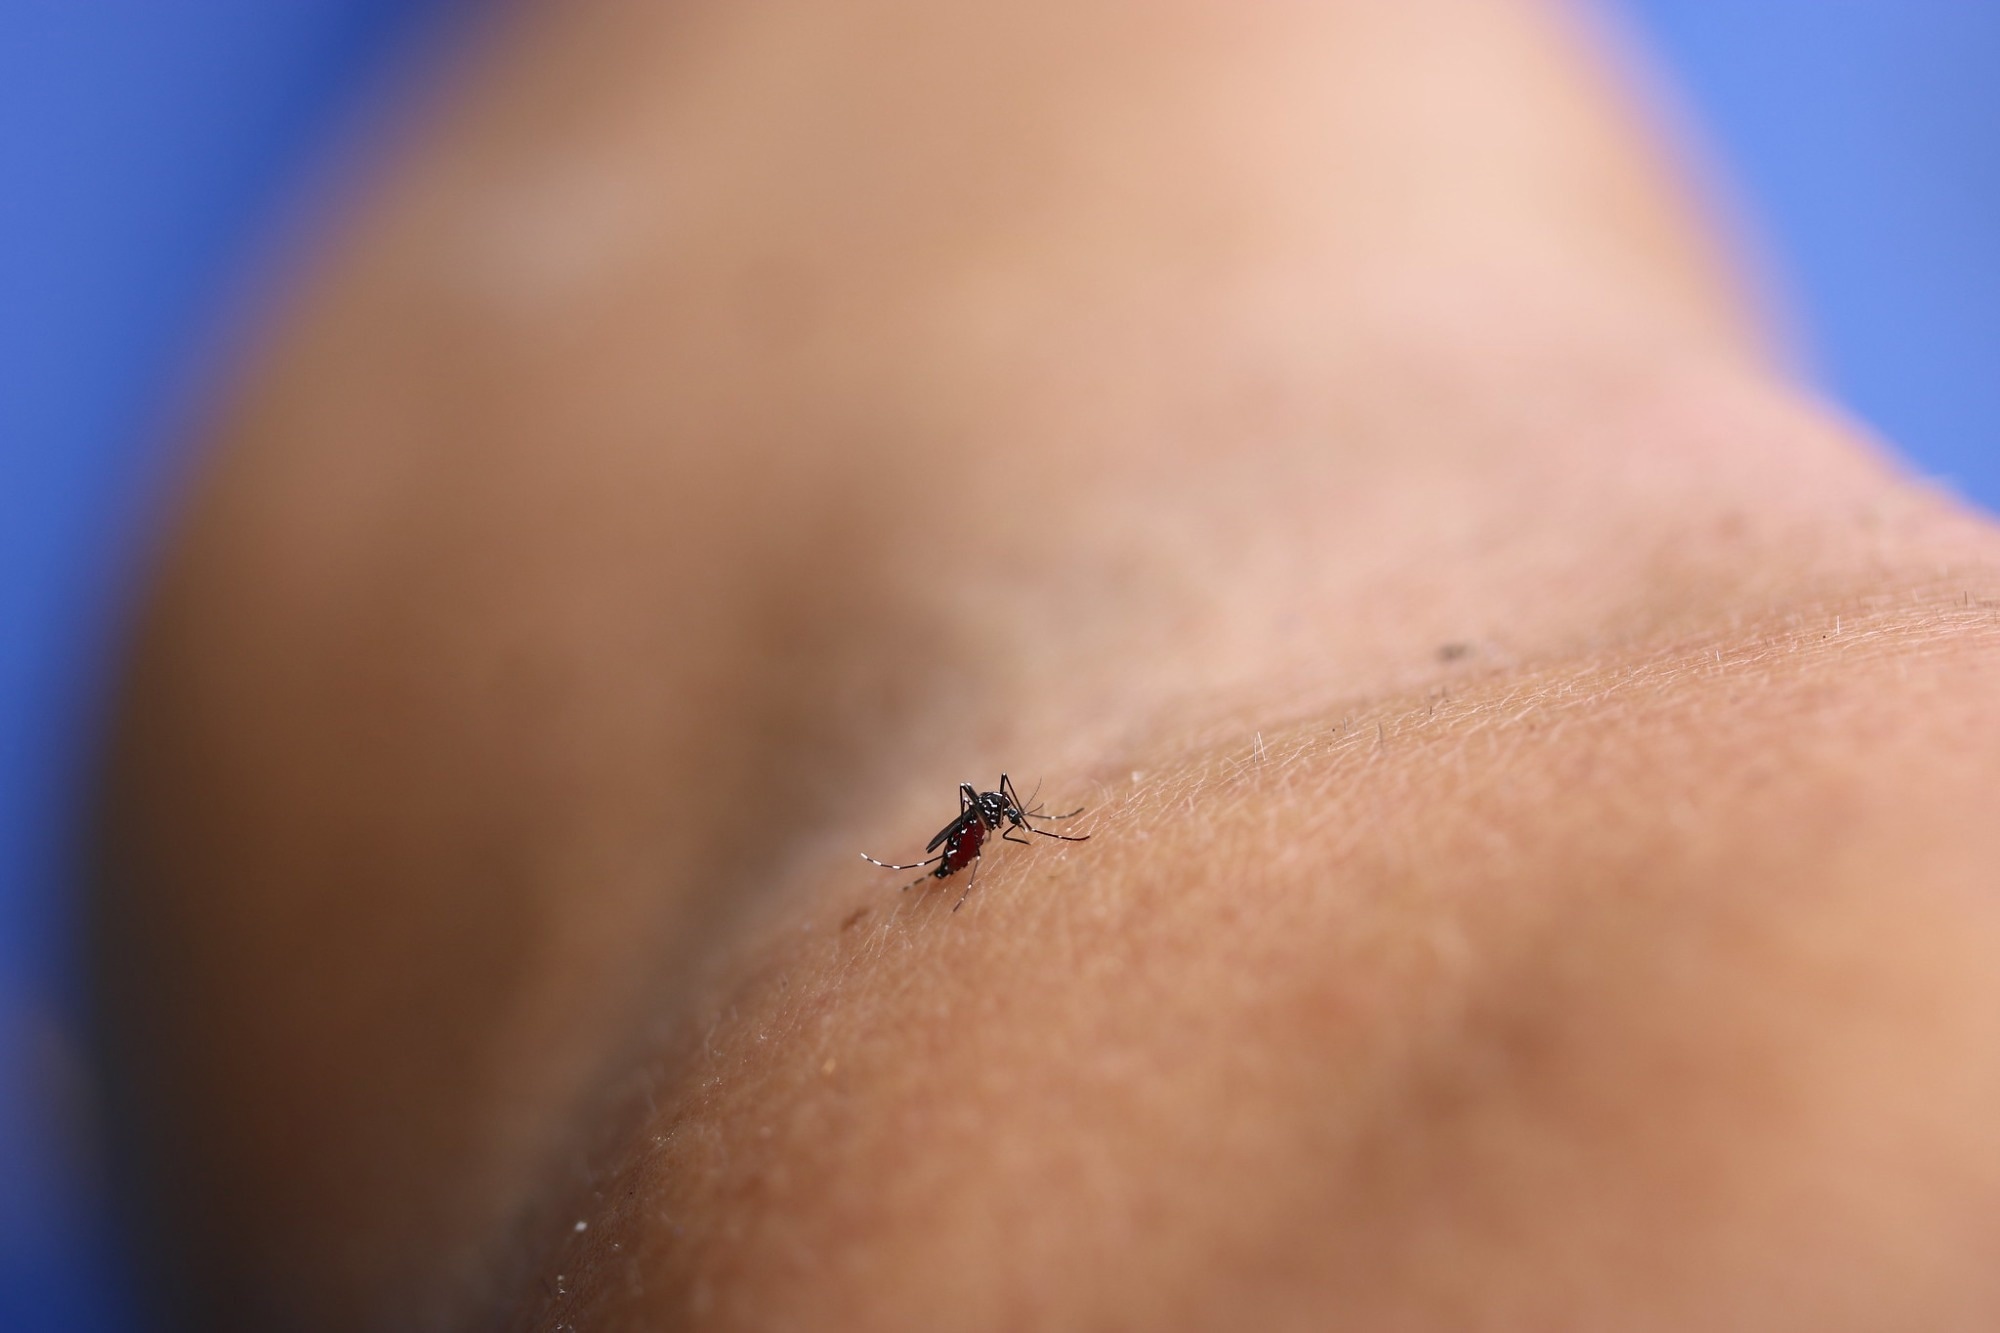 Study: Genomic and phenotypic analyses suggest moderate fitness differences among Zika virus lineages. Image Credit: NIAID